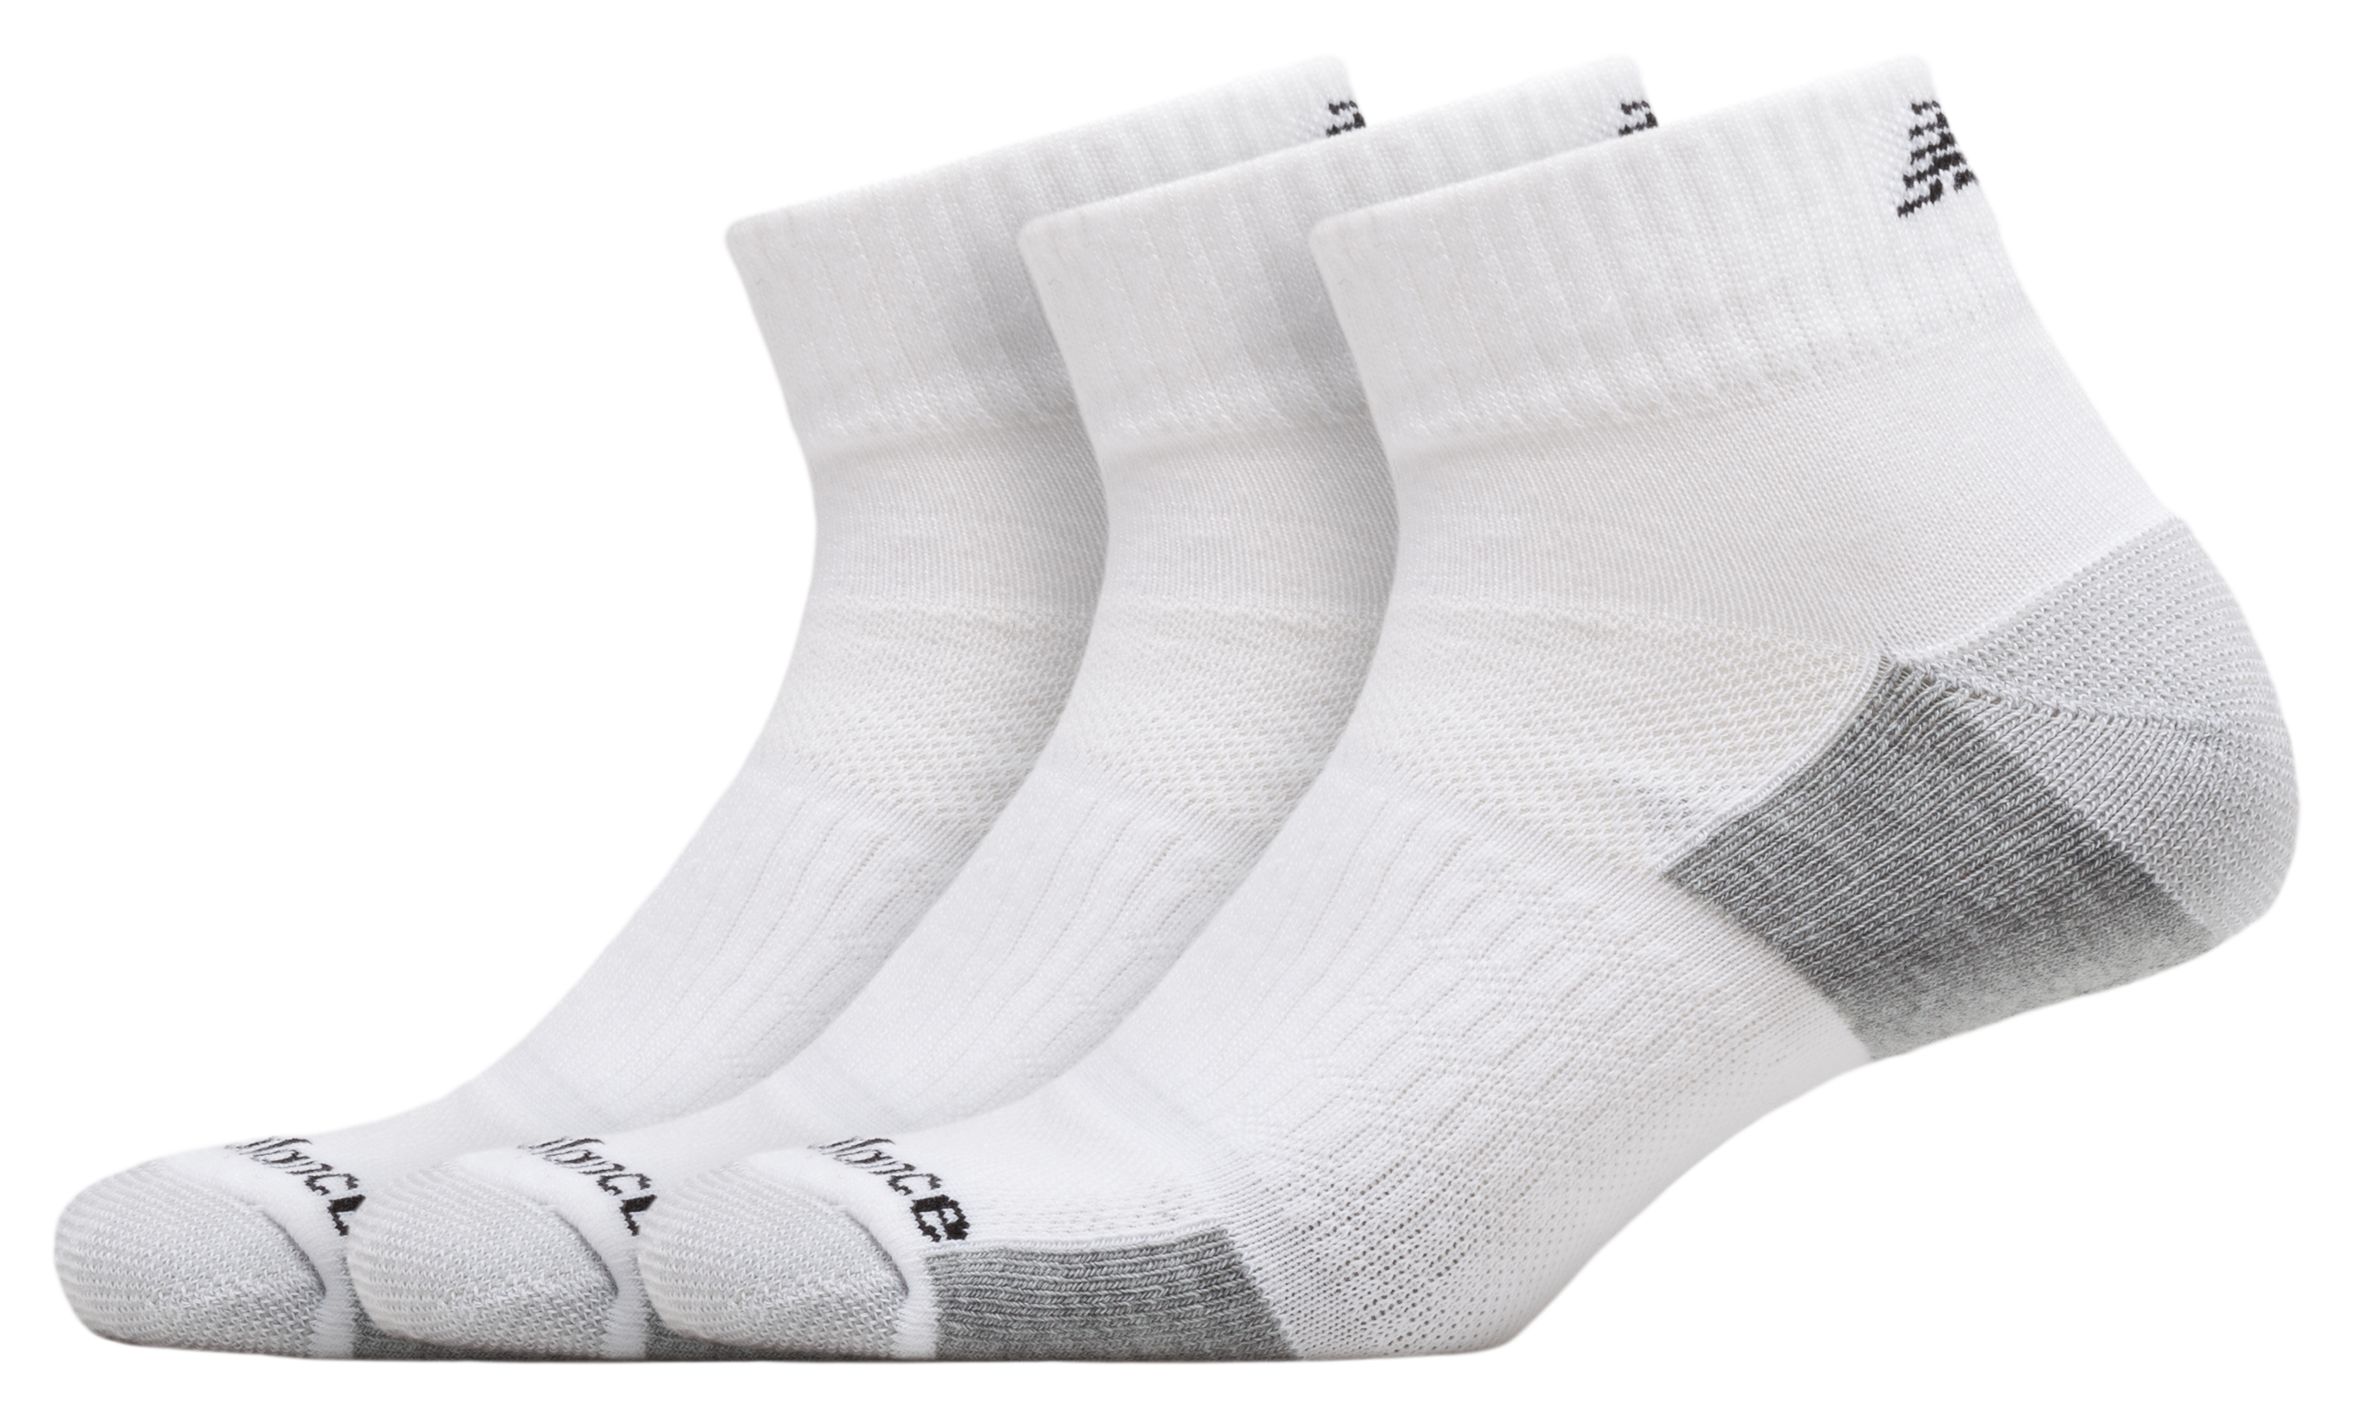 Essentials Cushioned Ankle Socks 3 Pack - New Balance